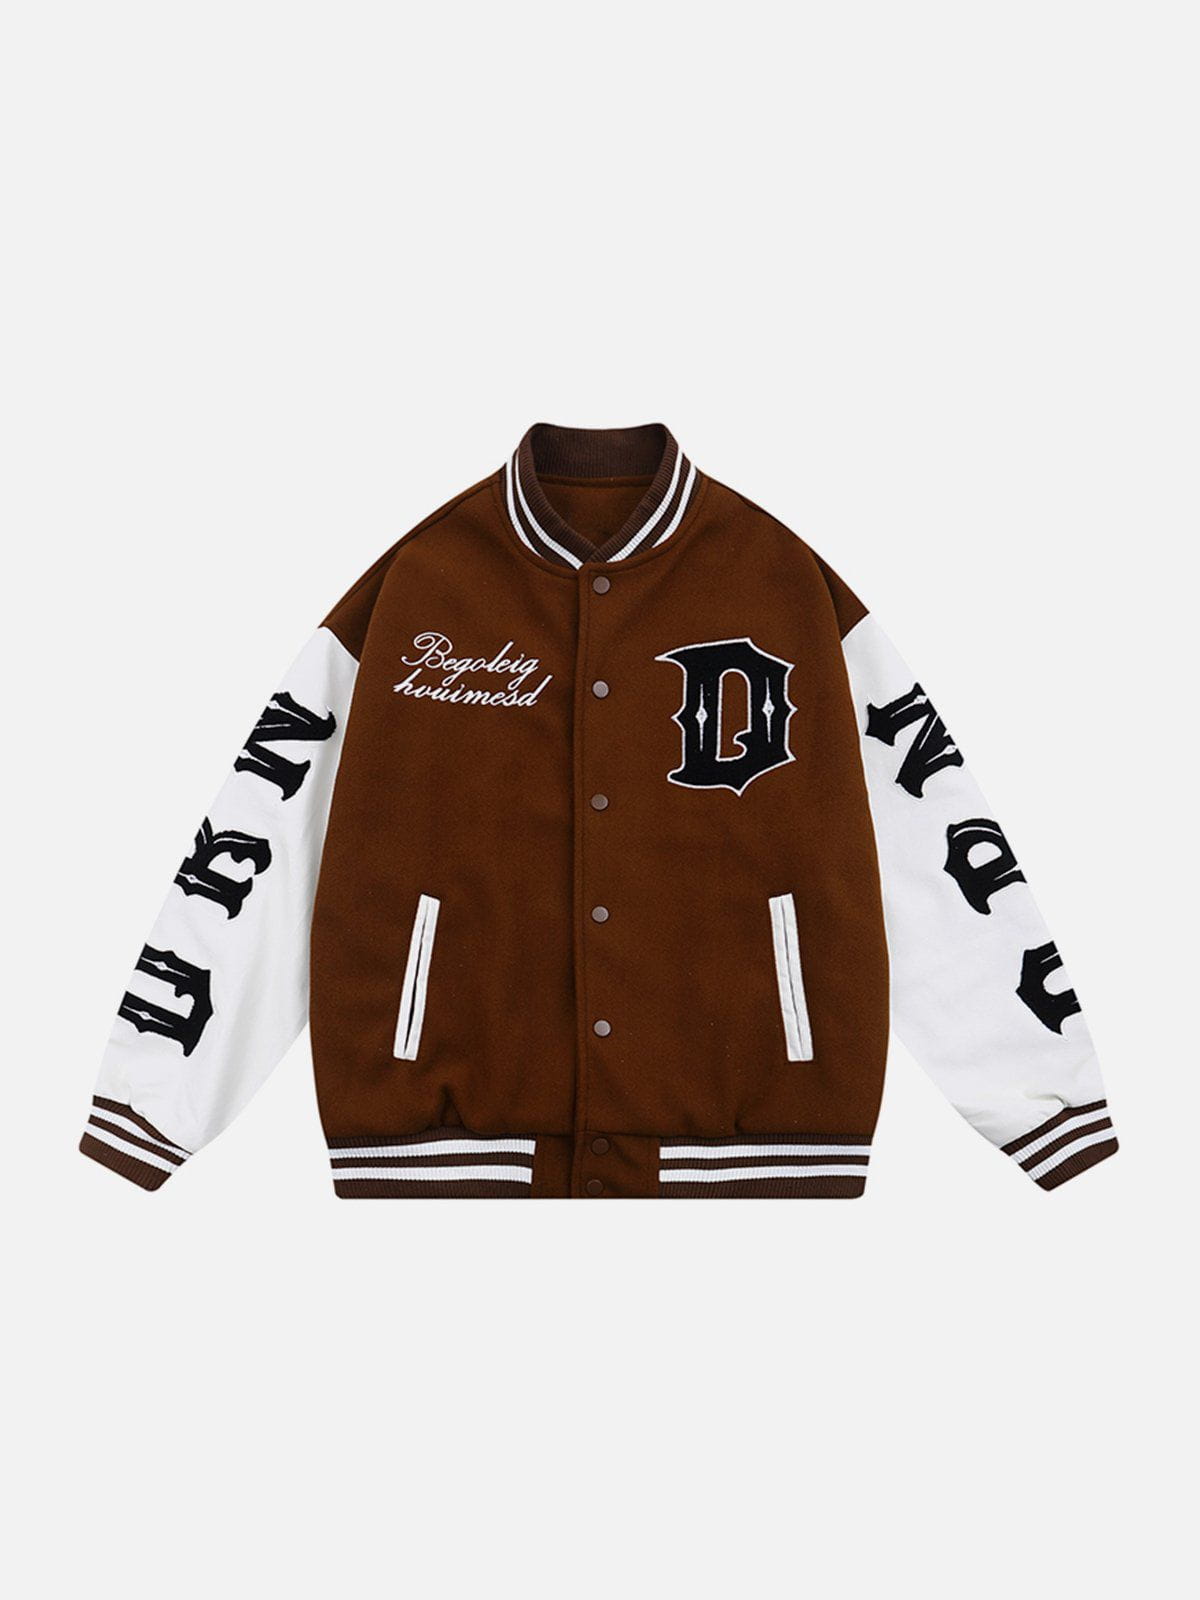 D Patch Embroidery Stitching Varsity Jacket Streetwear Brand Techwear Combat Tactical YUGEN THEORY